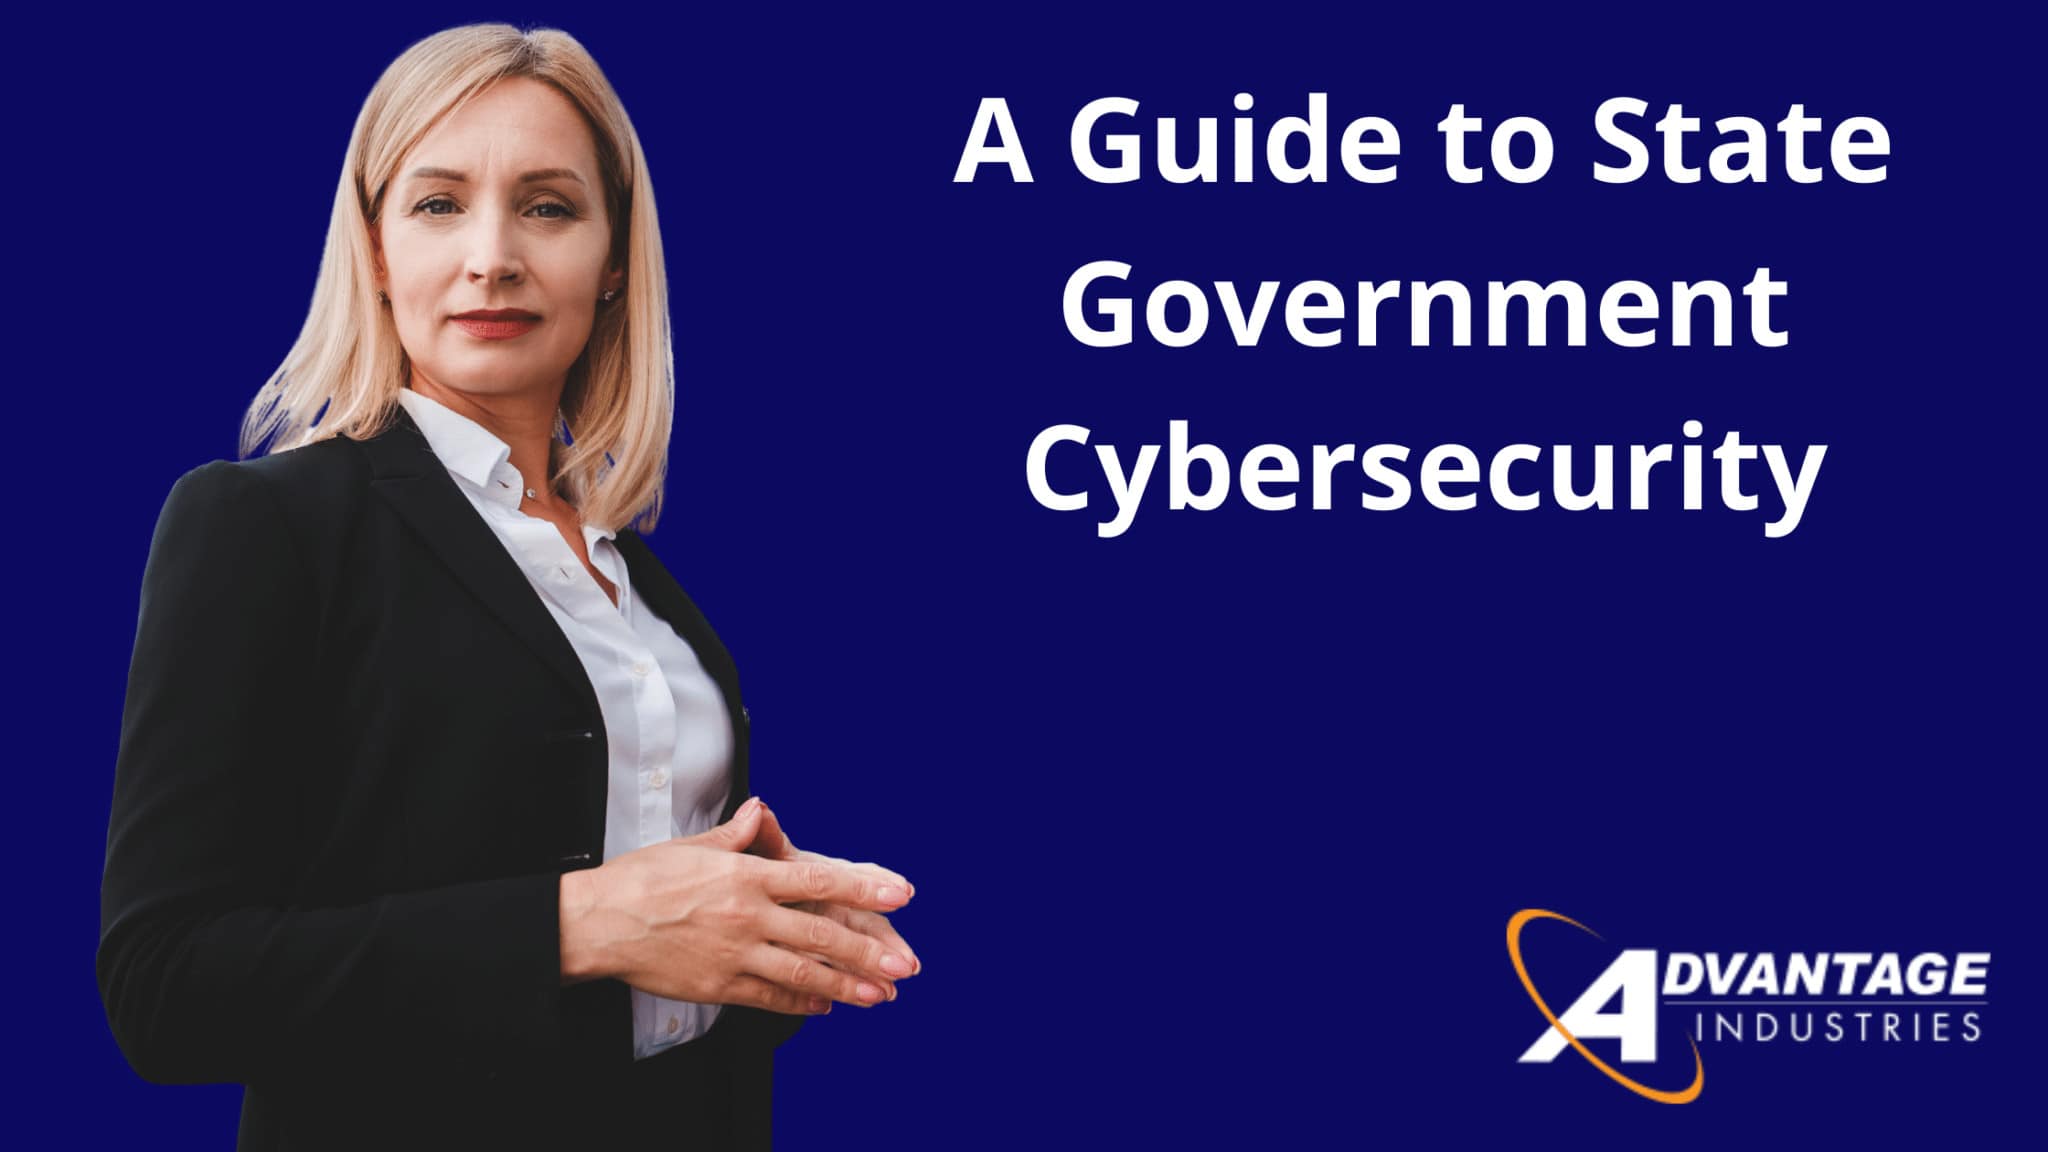 A Guide to State Government Cybersecurity